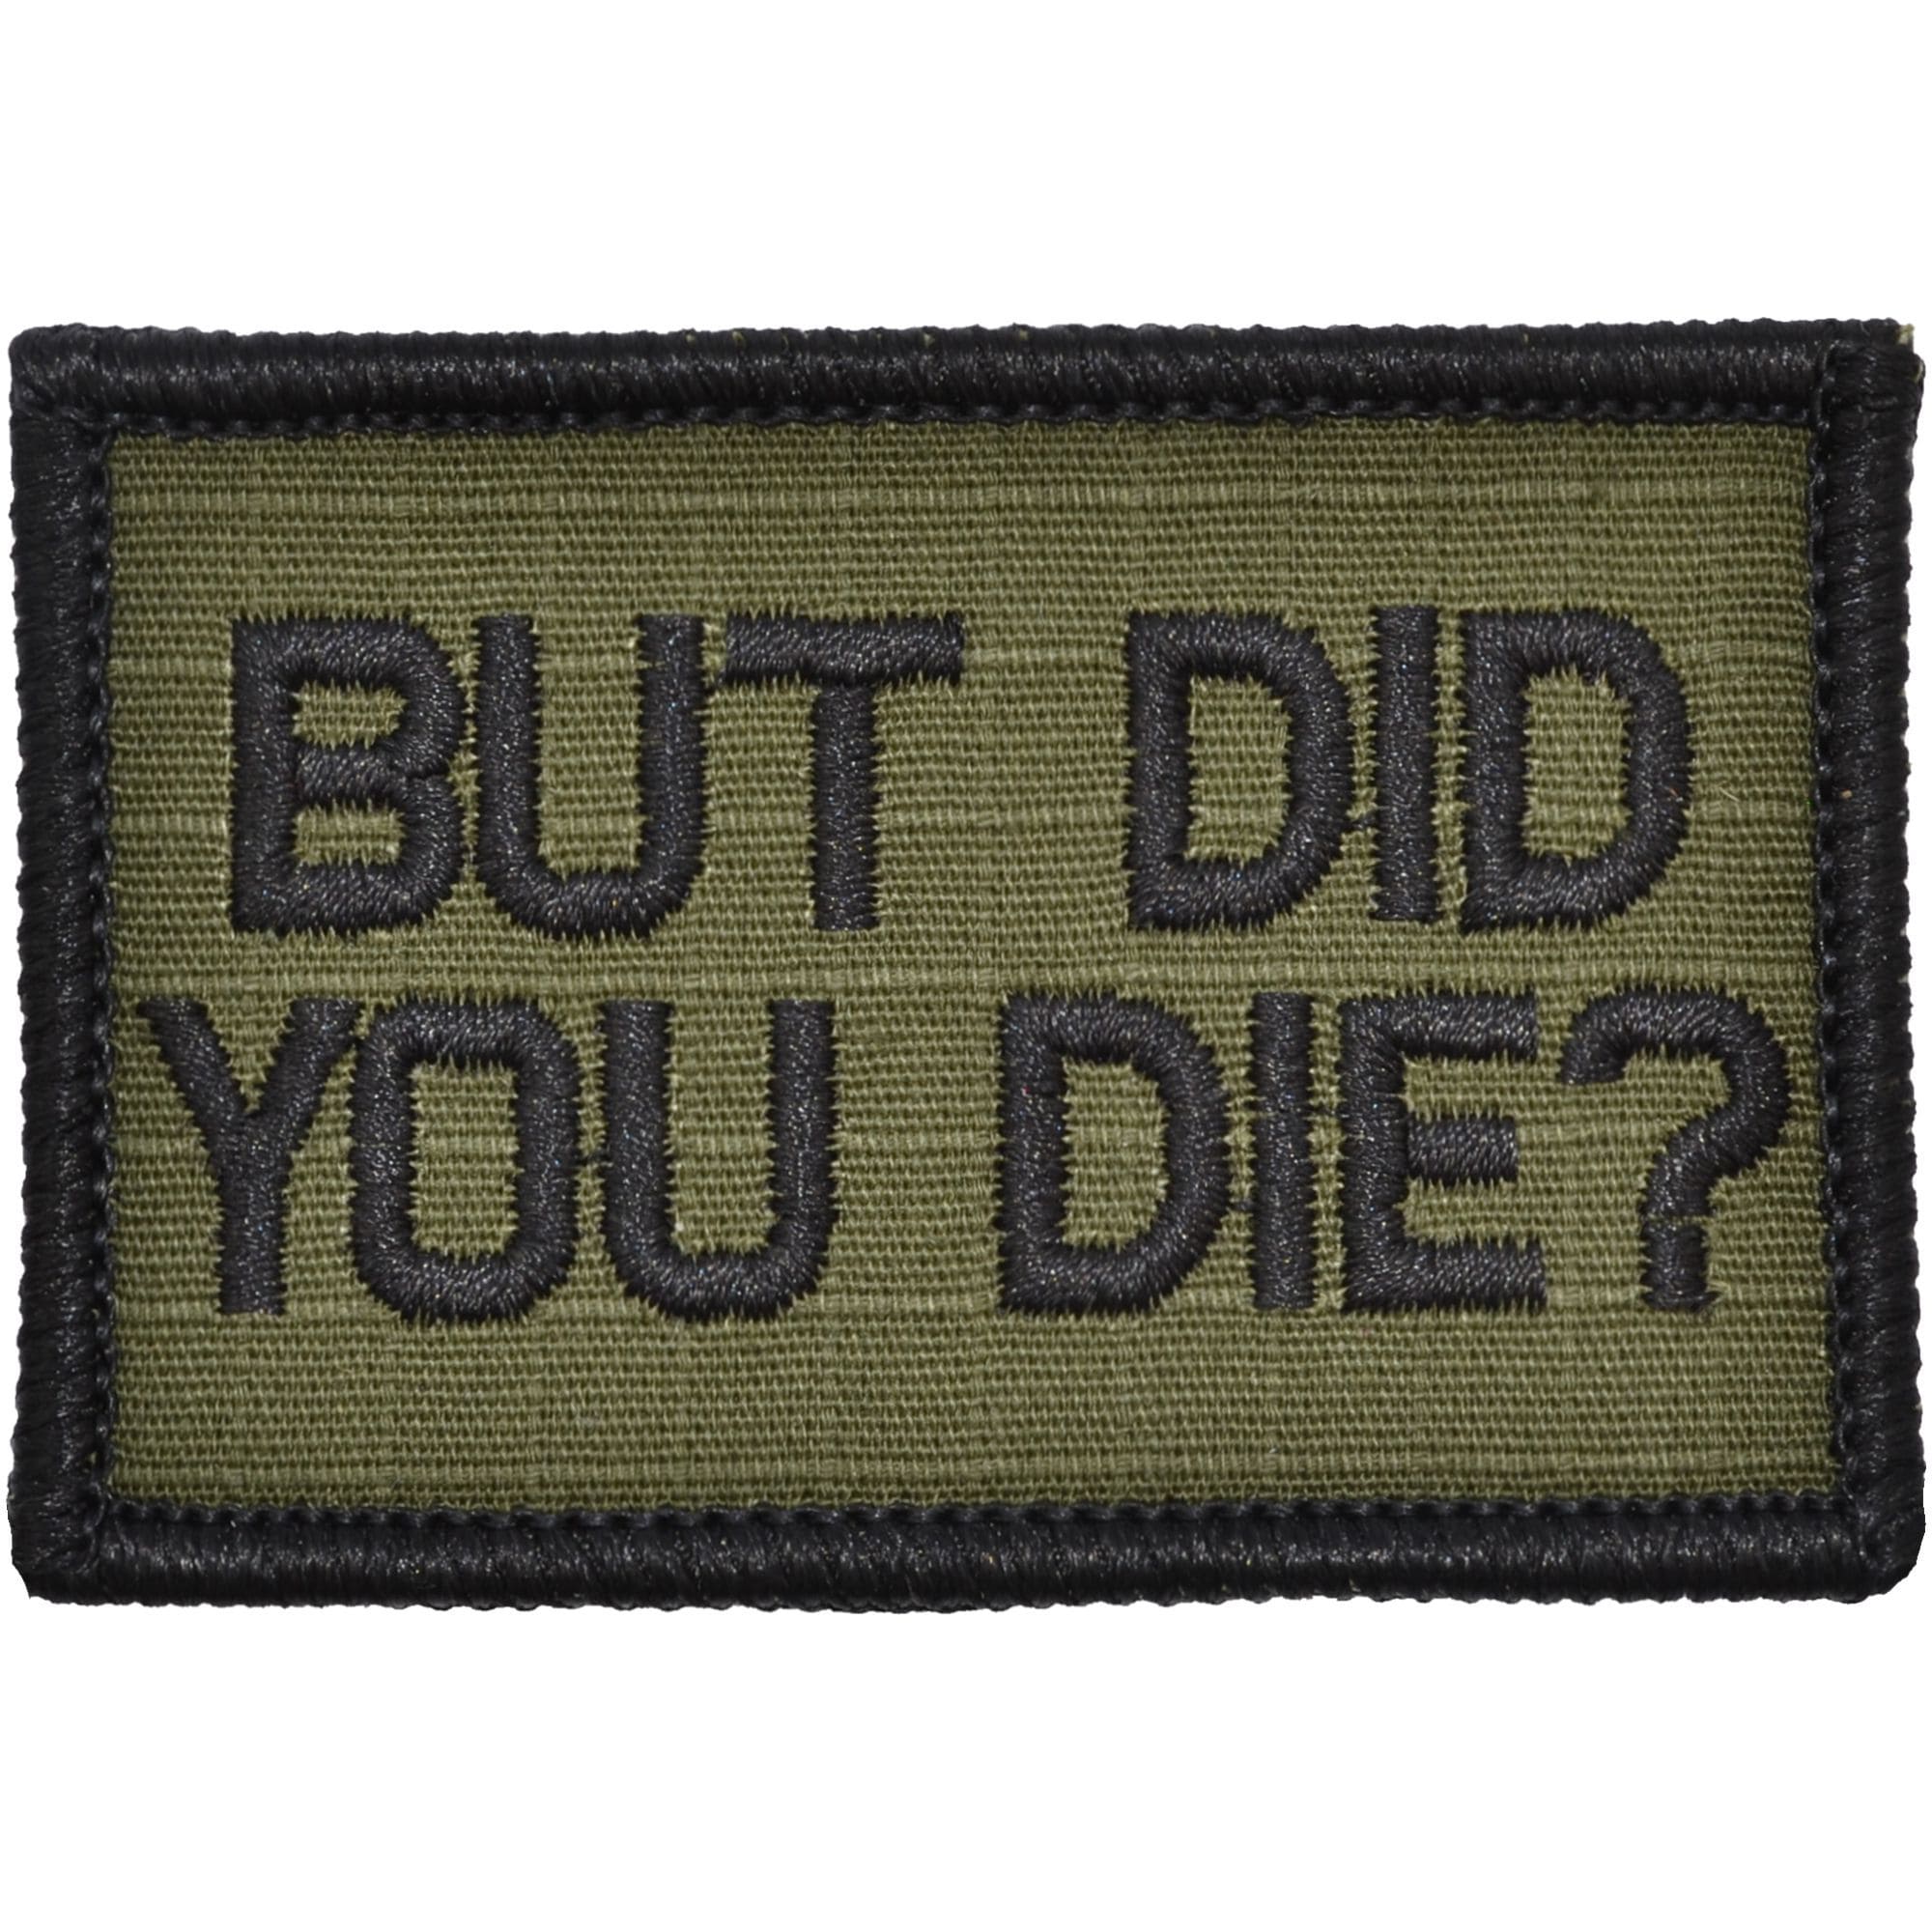 Tactical Gear Junkie Patches Olive Drab But Did You Die? - 2x3 Patch